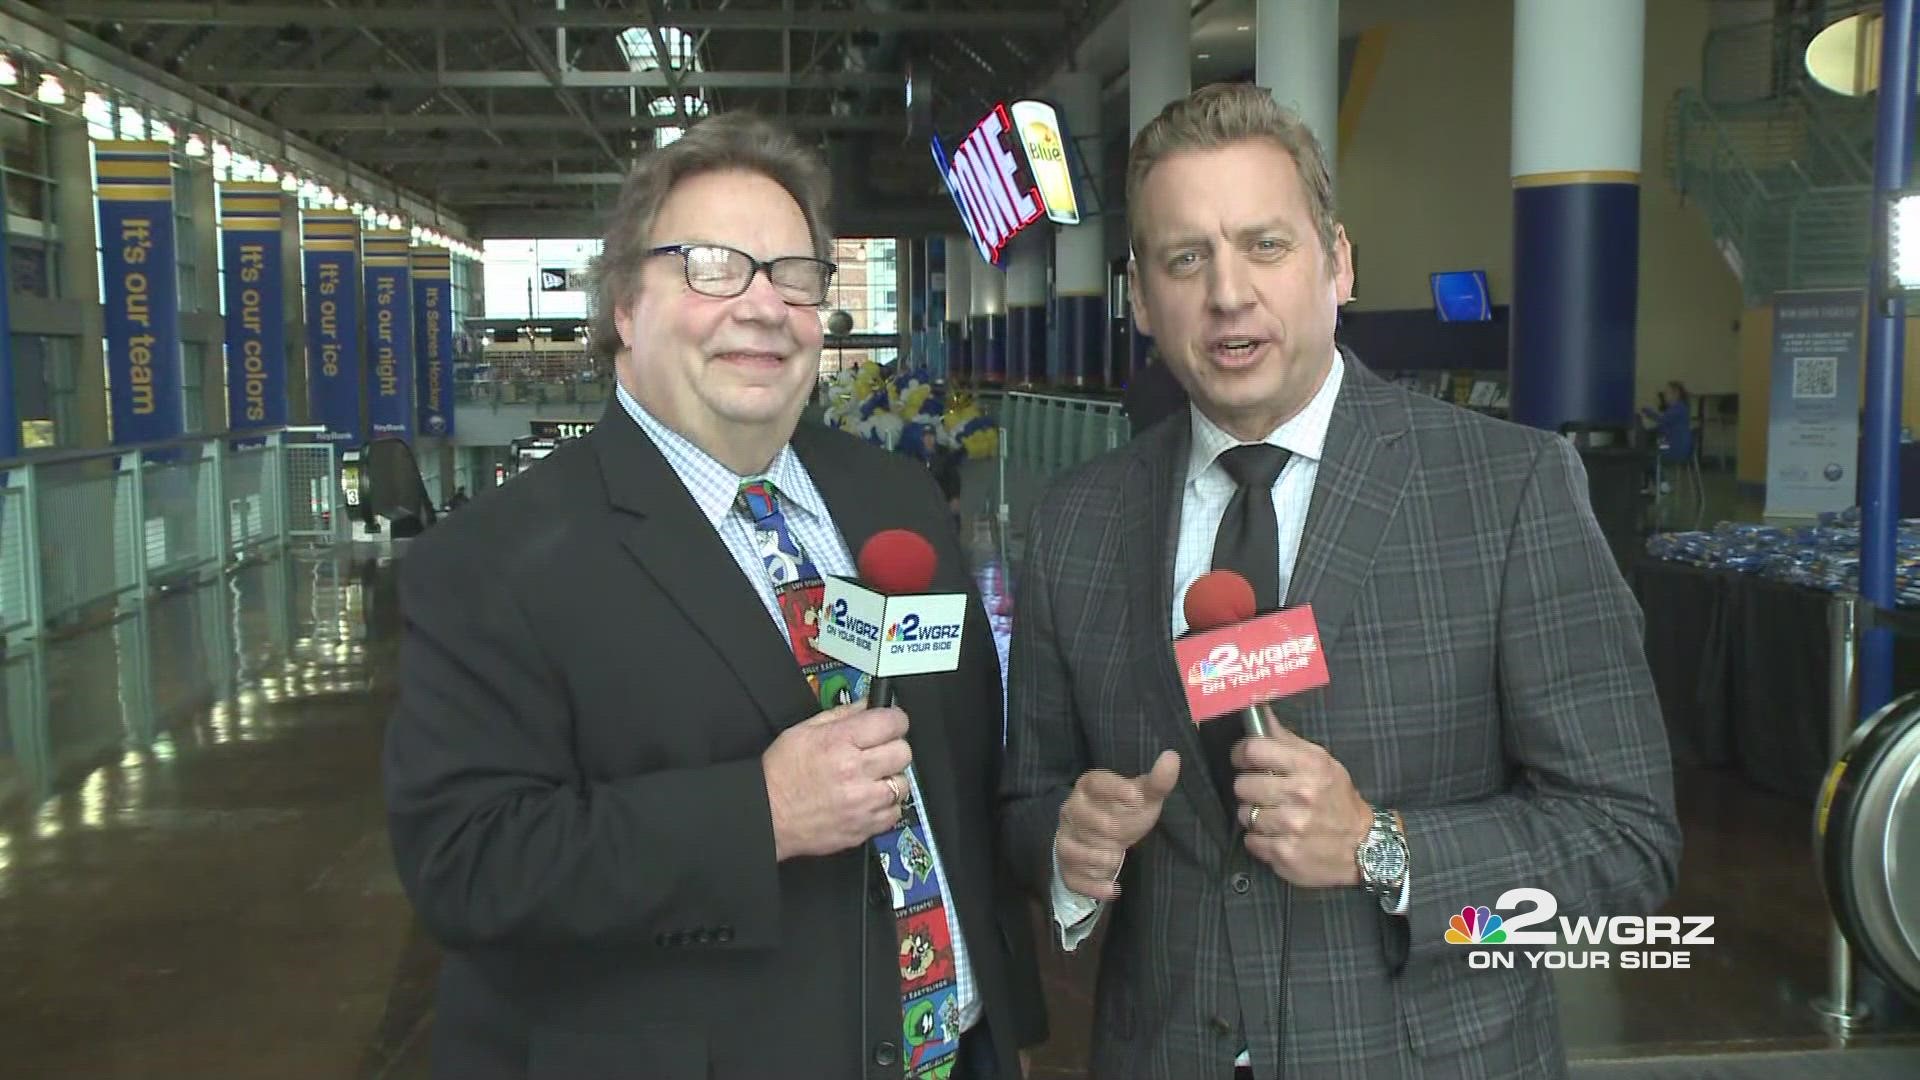 Take 2: Channel 2 Sports Director Adam Benigni and Paul Hamilton discuss the Buffalo Sabres as opening night arrives at KeyBank Center.